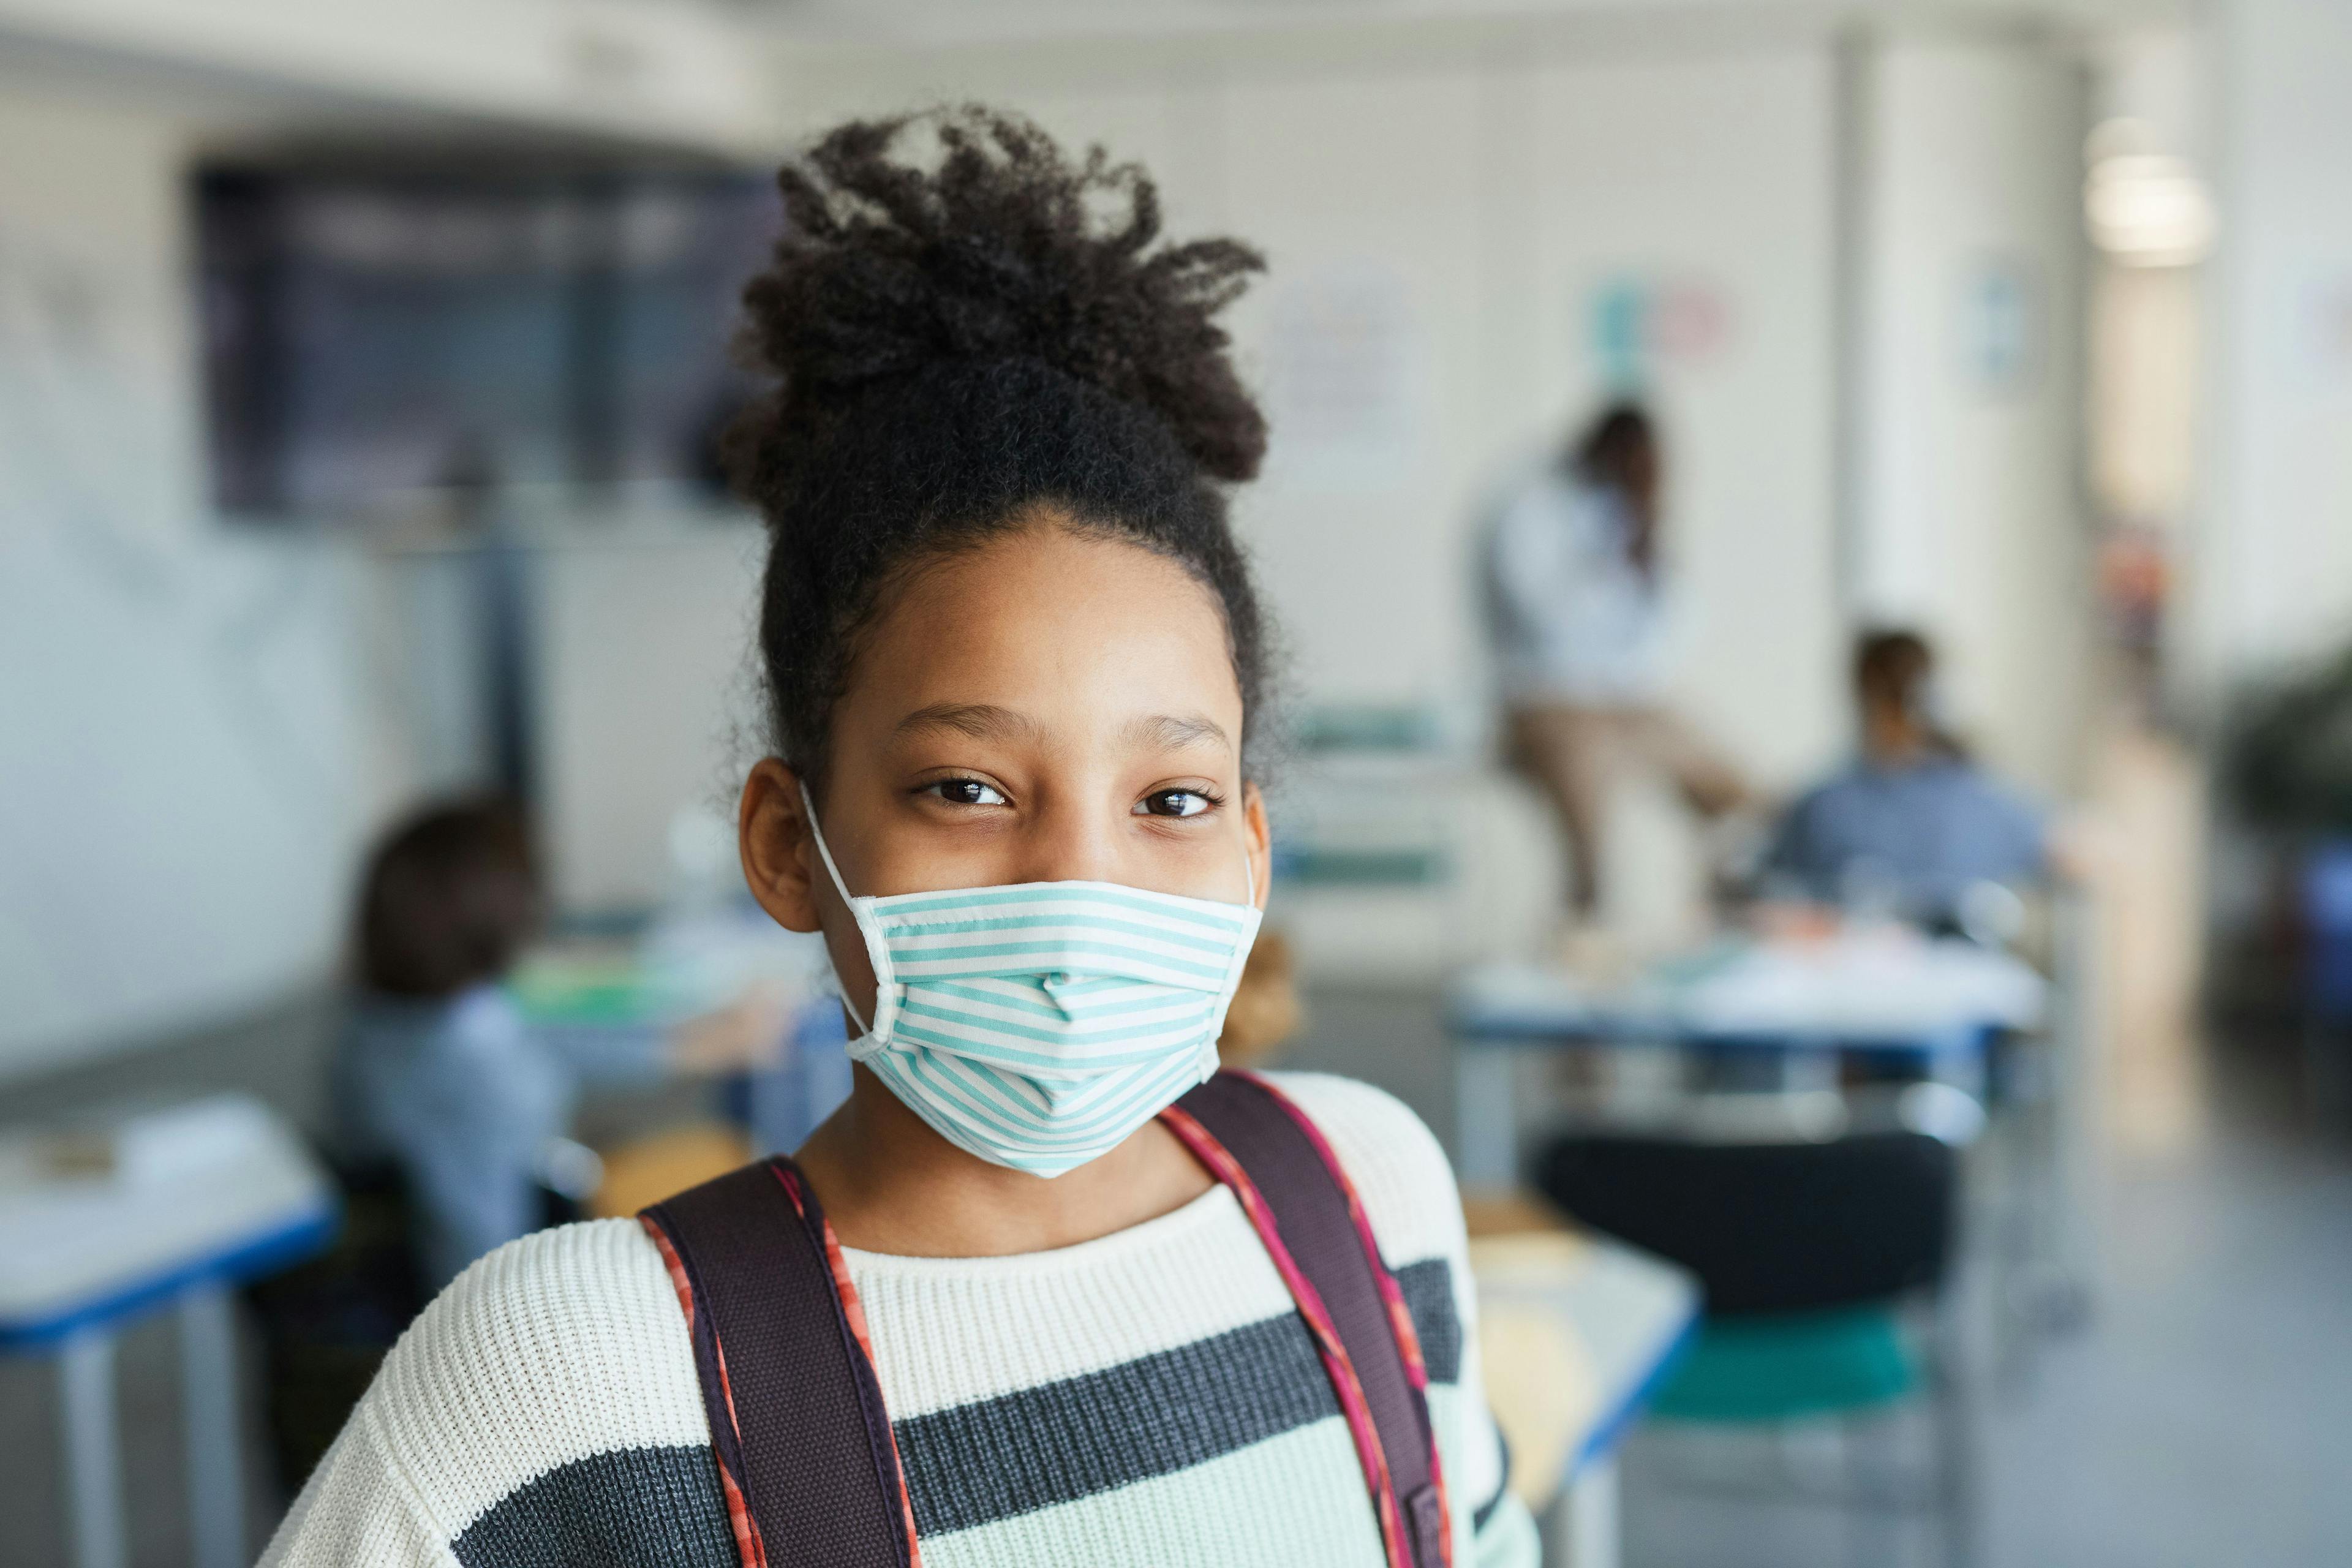 Masks in schools do not increase infection risk